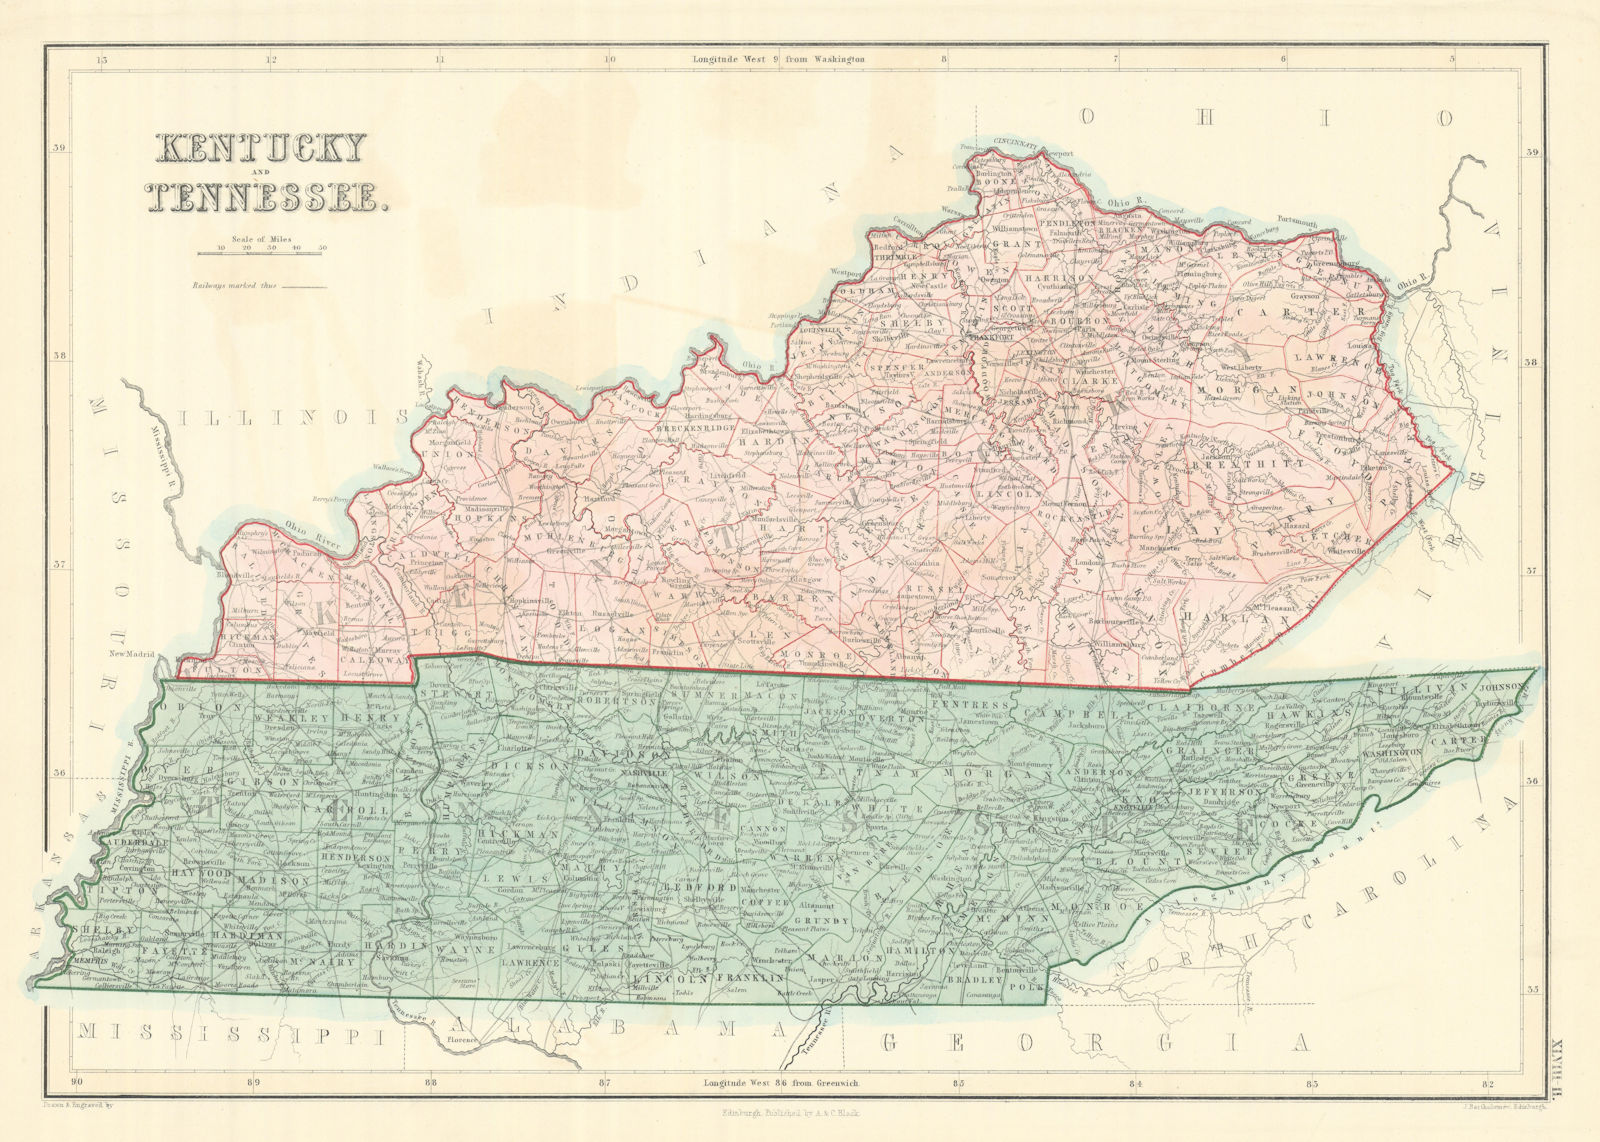 Kentucky & Tennessee state map showing counties. JOHN BARTHOLOMEW 1854 old